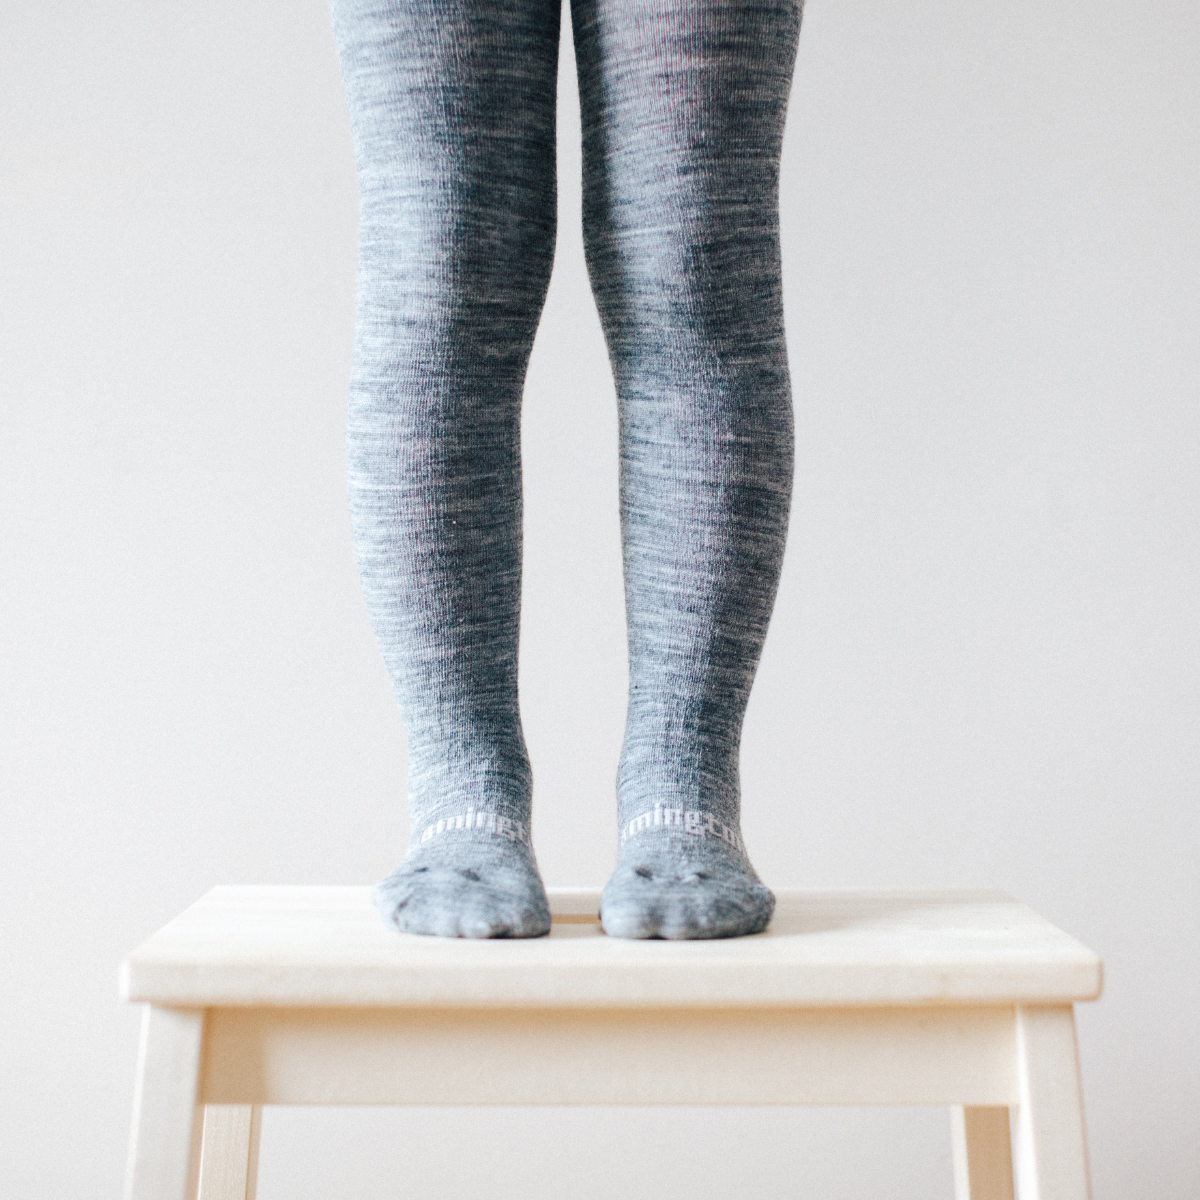 bryon mcelroy add photo wool tights with feet